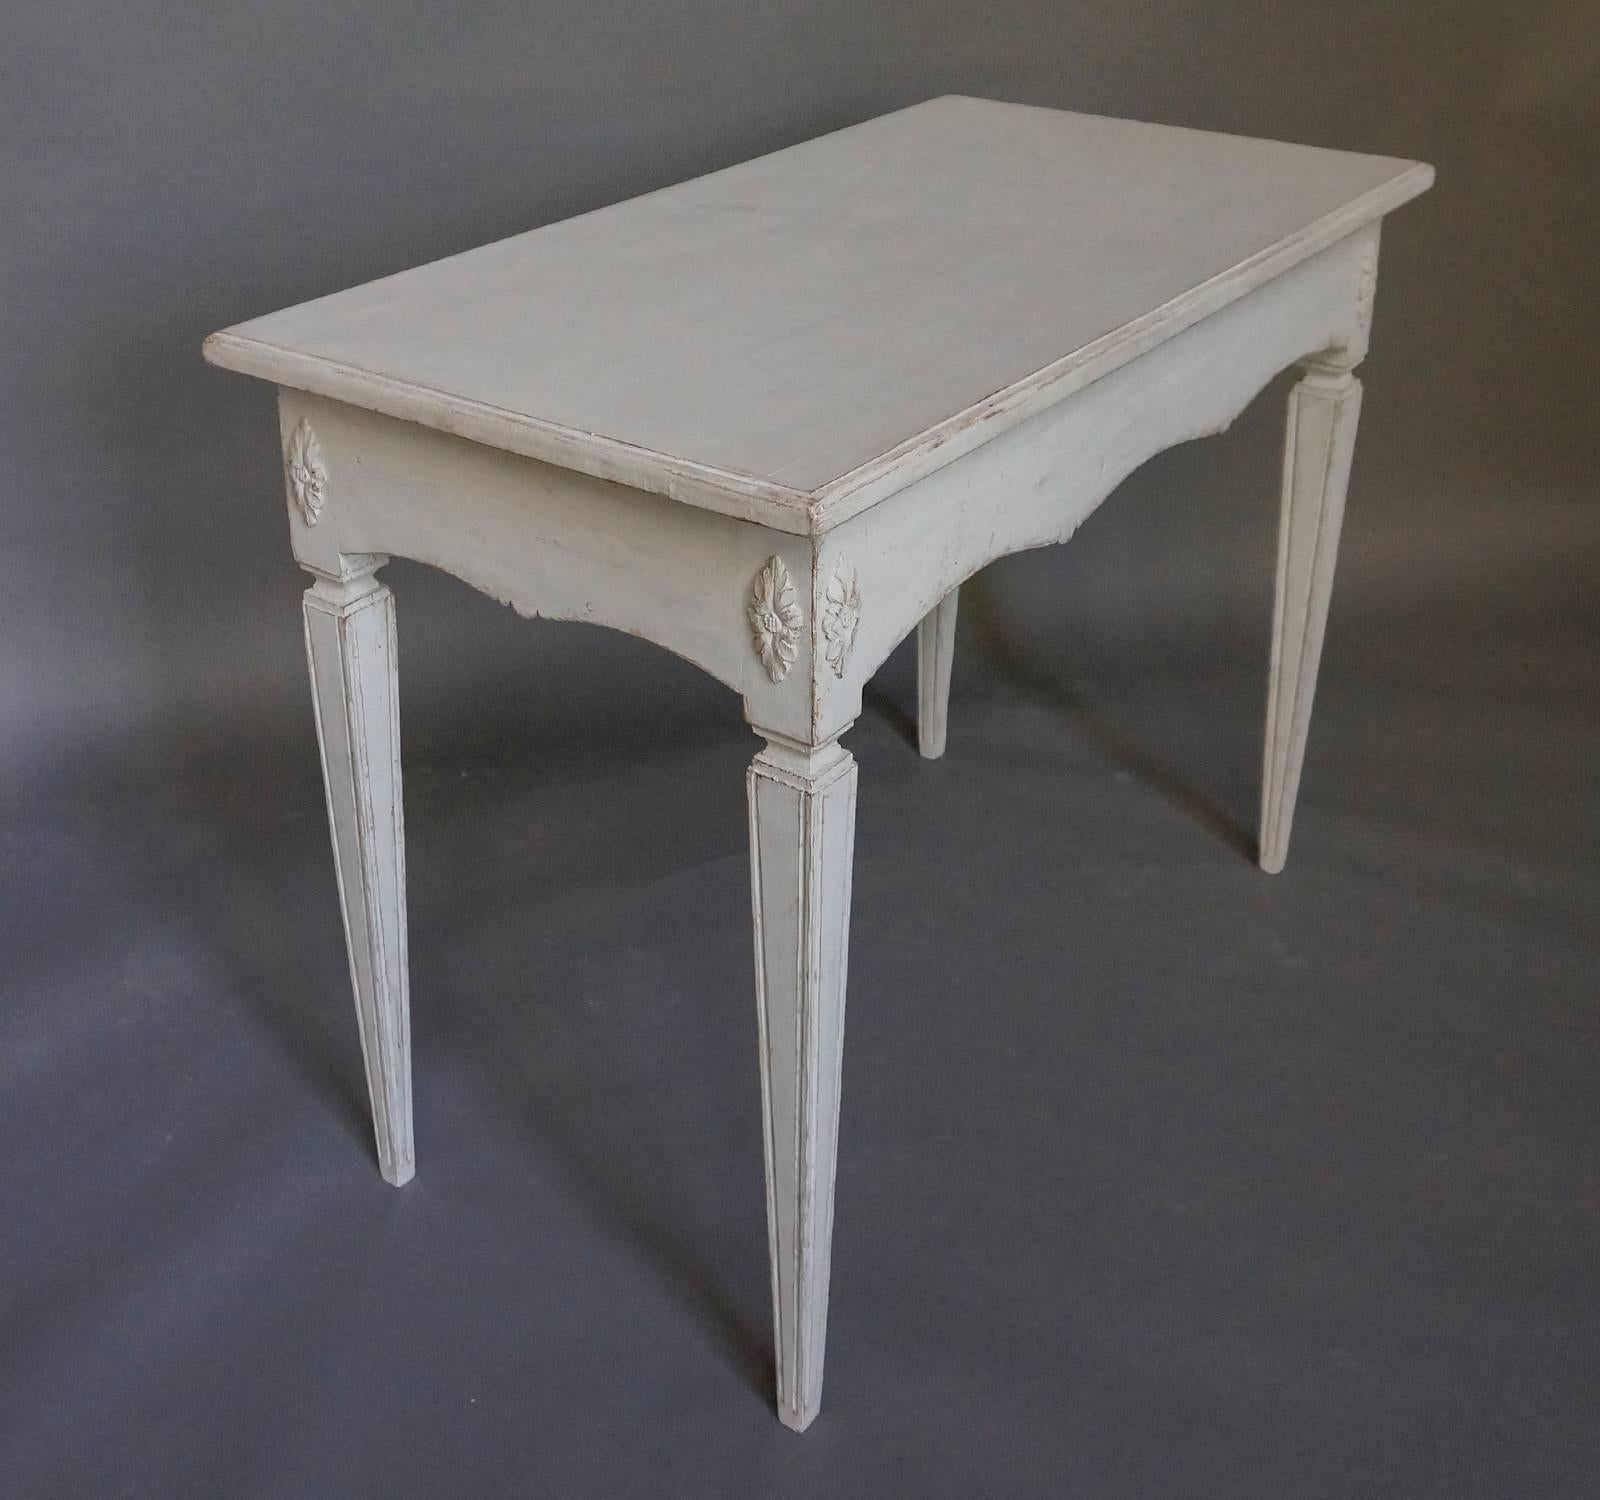 Freestanding table (finished on all sides) in the Gustavian Style, Sweden circa 1860, with scalloped apron. The tapering square legs have applied florets at the tops.